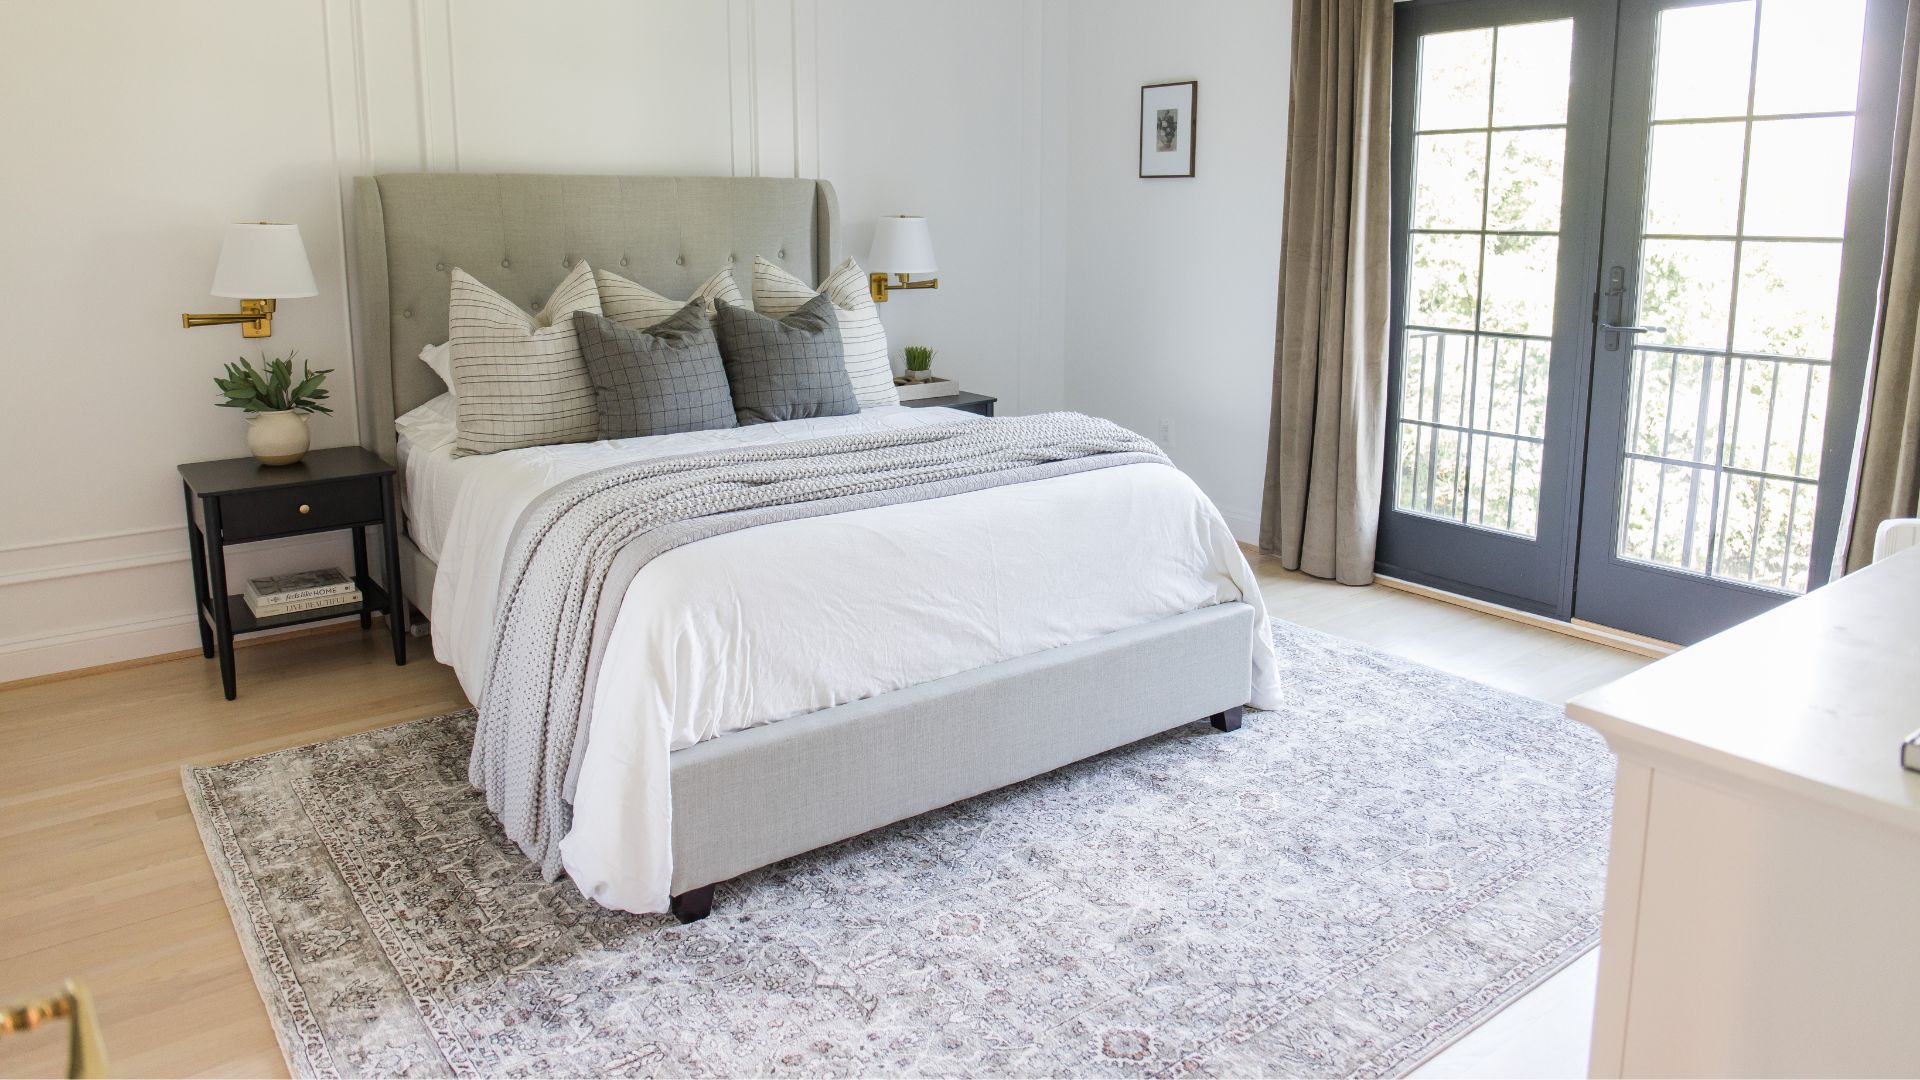 Can you put a 4x6 rug under a queen bed?